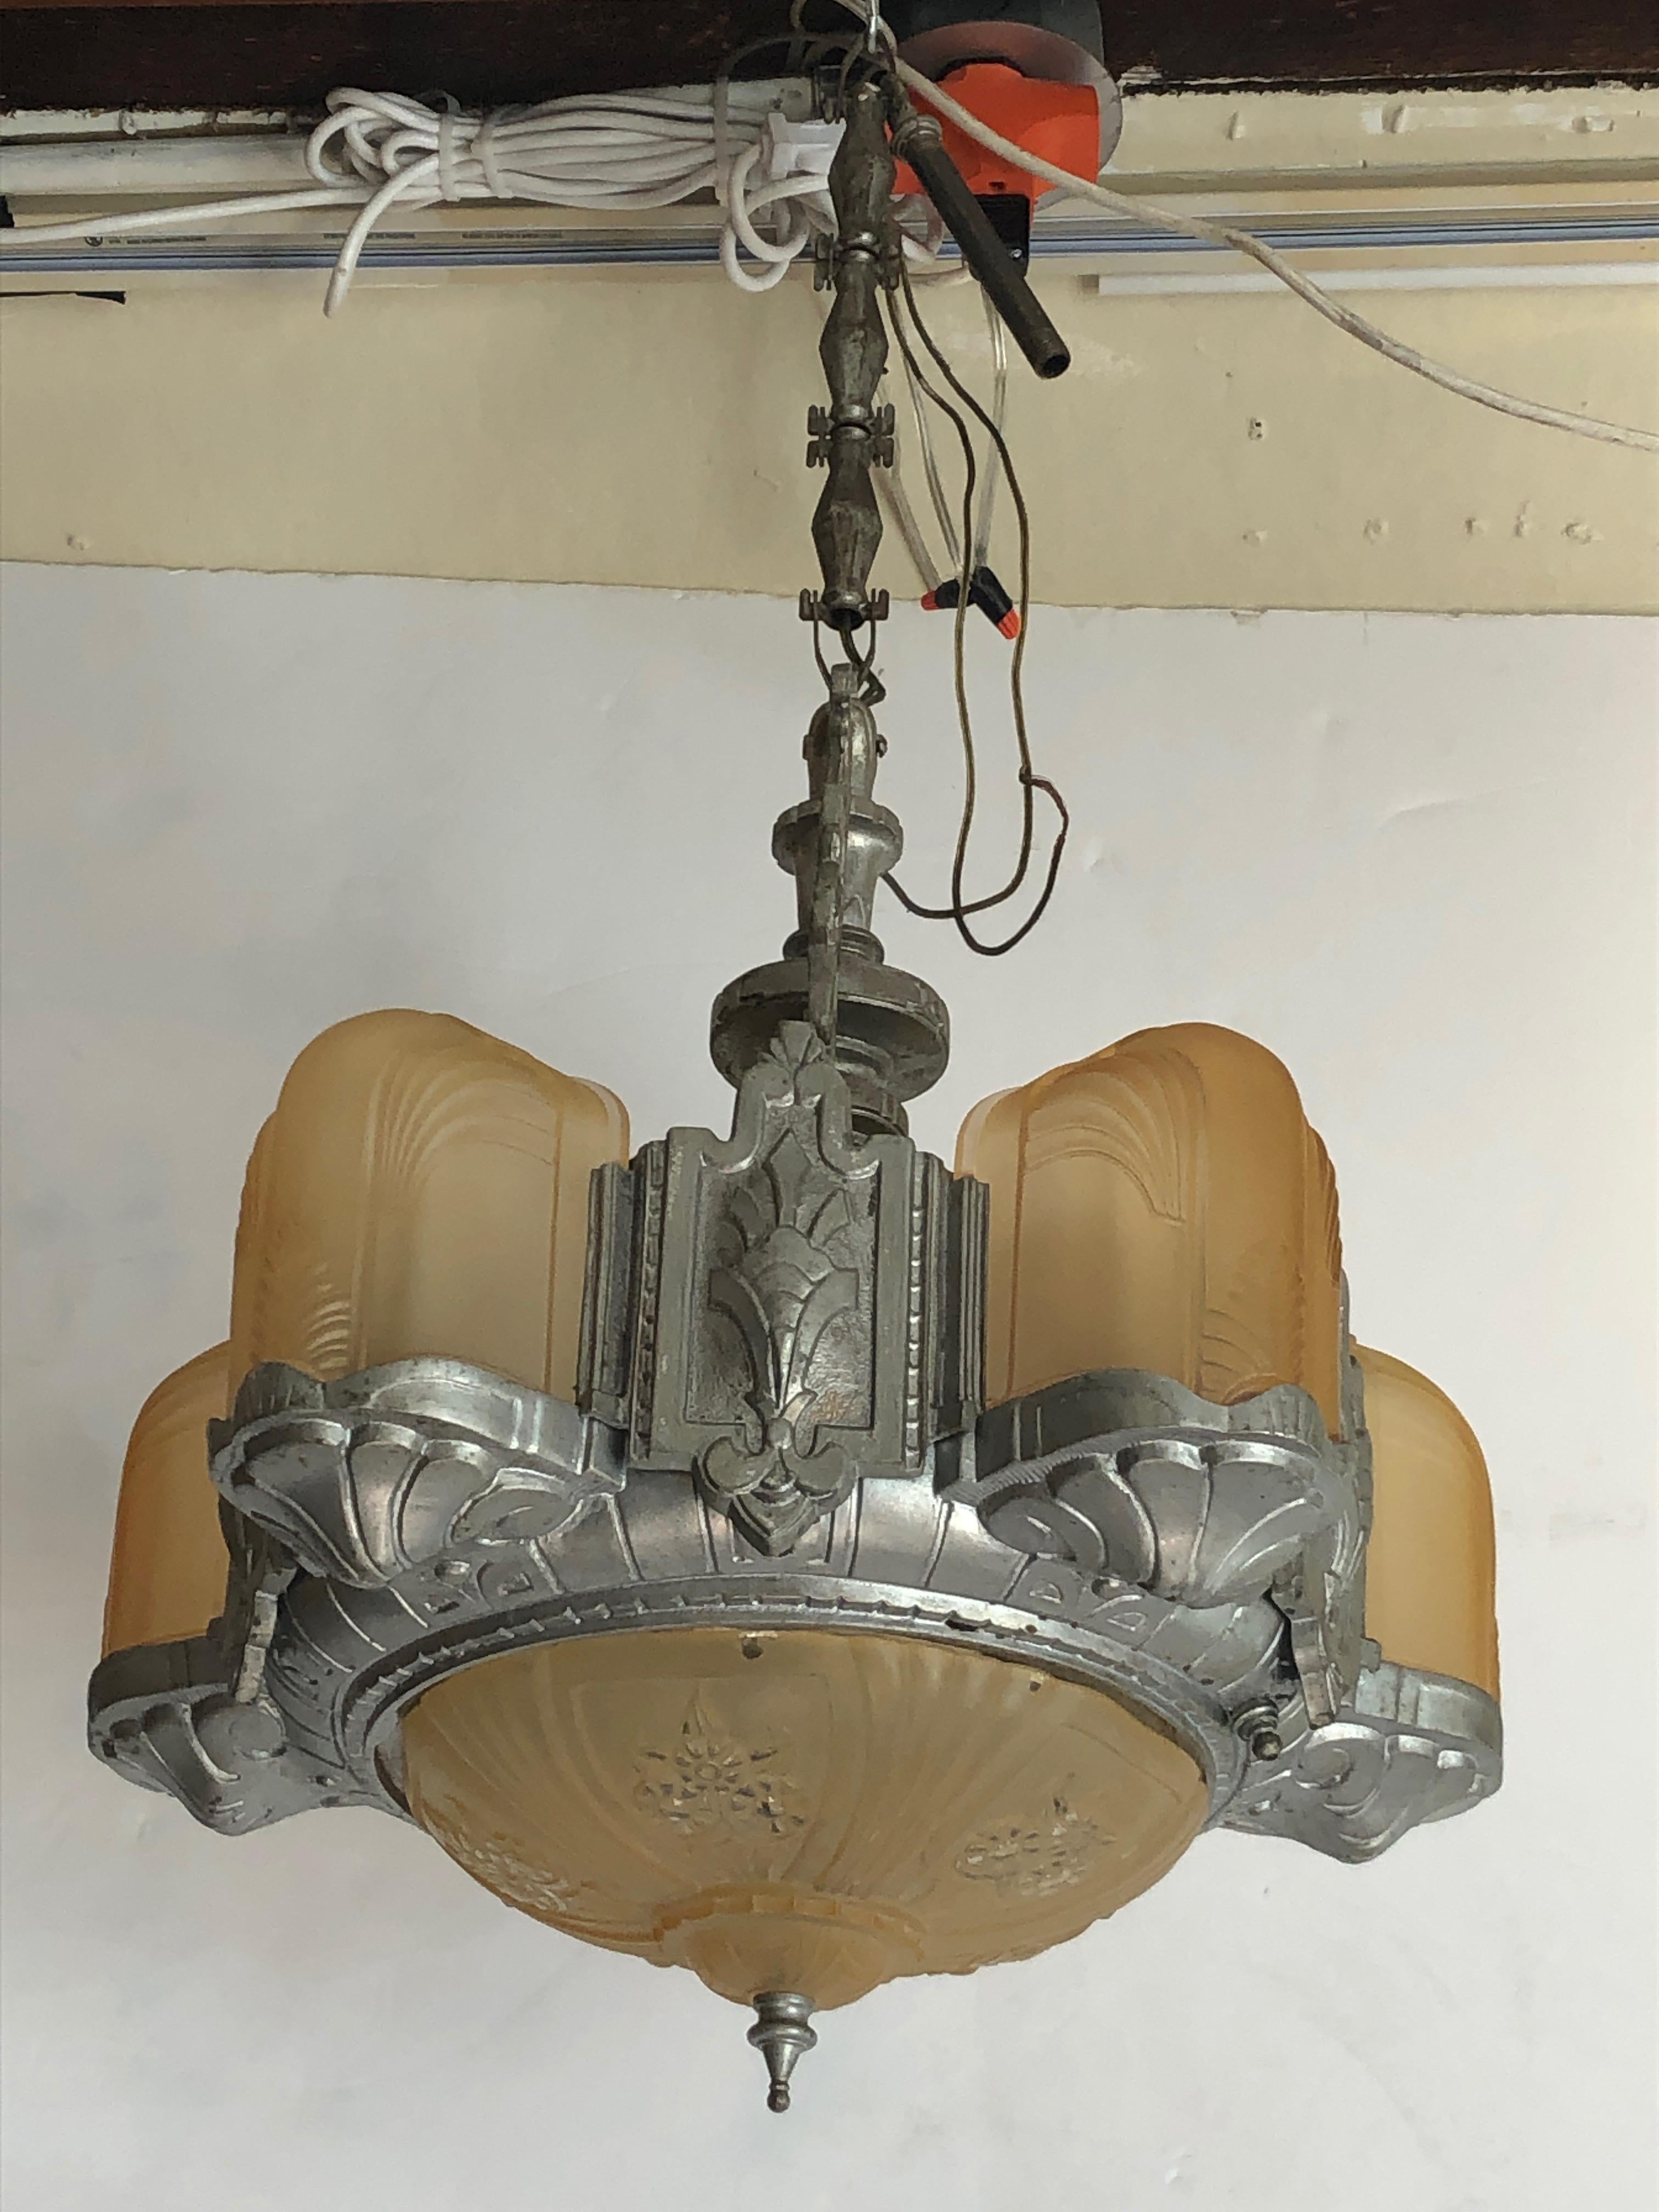 A beautiful period Art Deco light fixture having 5 gold frosted glass shades around the periphery and an ornate matching bowl of glass at the bottom. Decorative pewter colored metal creates the body of the chandelier. Original ornate chain and